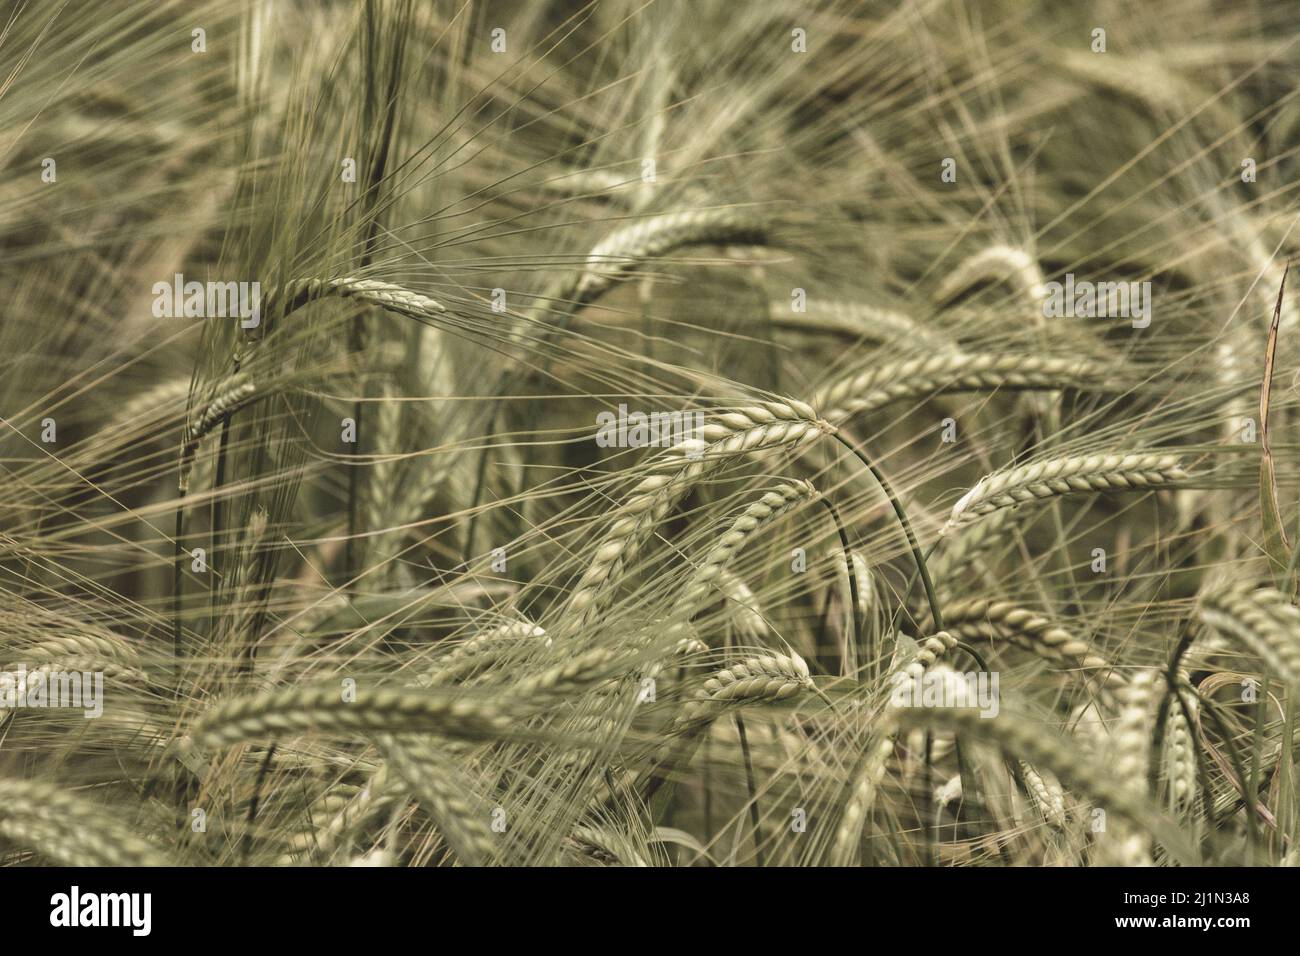 Sepia tinted heads of green barley / Hordeum vulgare growing. Focus on the head just right of picture centre. For concept of food security. Stock Photo